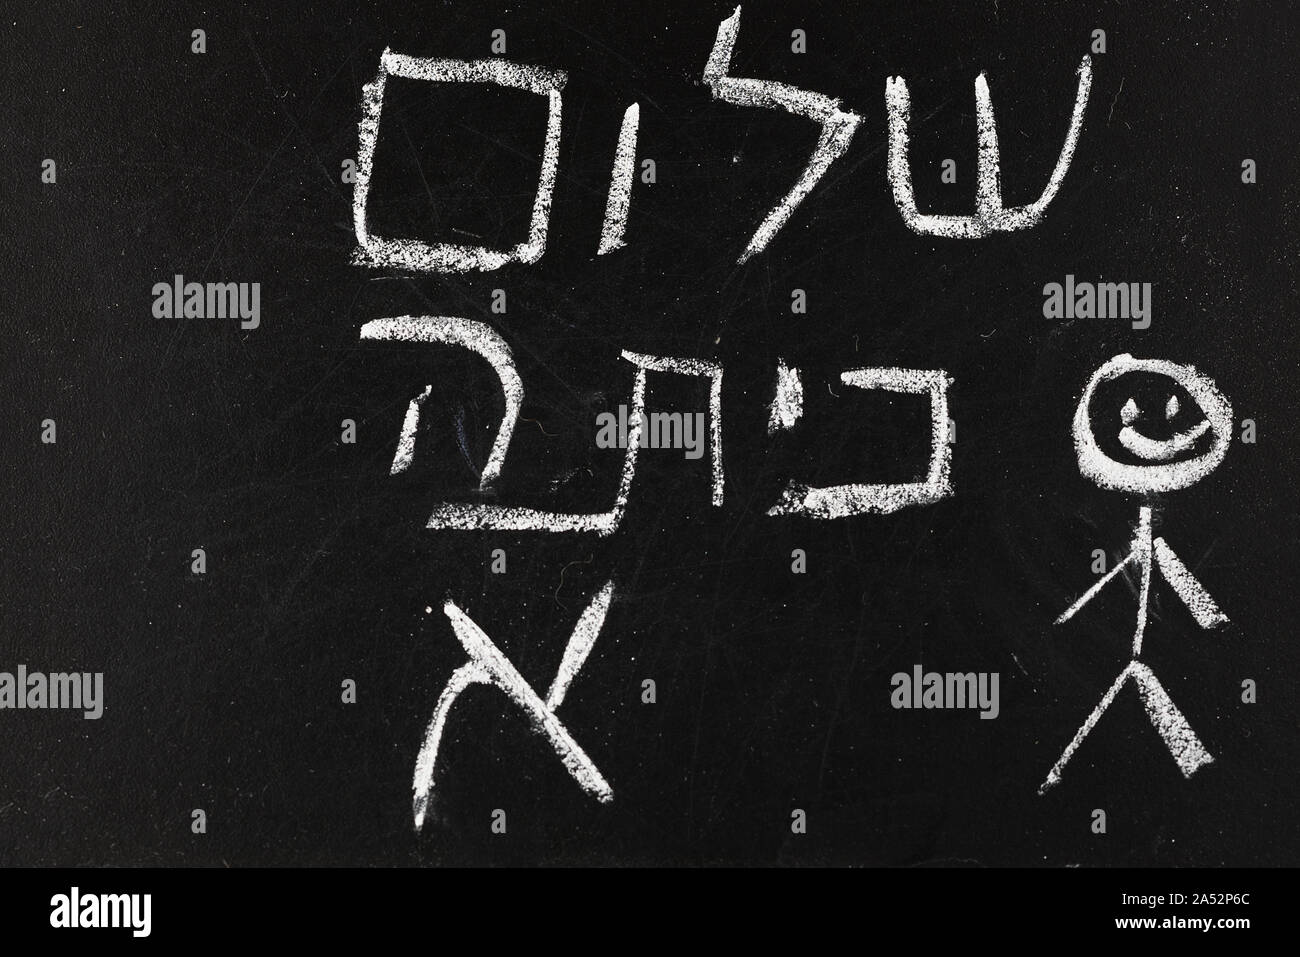 Back to School. Blackboard or chalkboard with Hello First Grade class greetings in Hebrew Shalom Kita Alef written with white chalk on the black board. Stock Photo